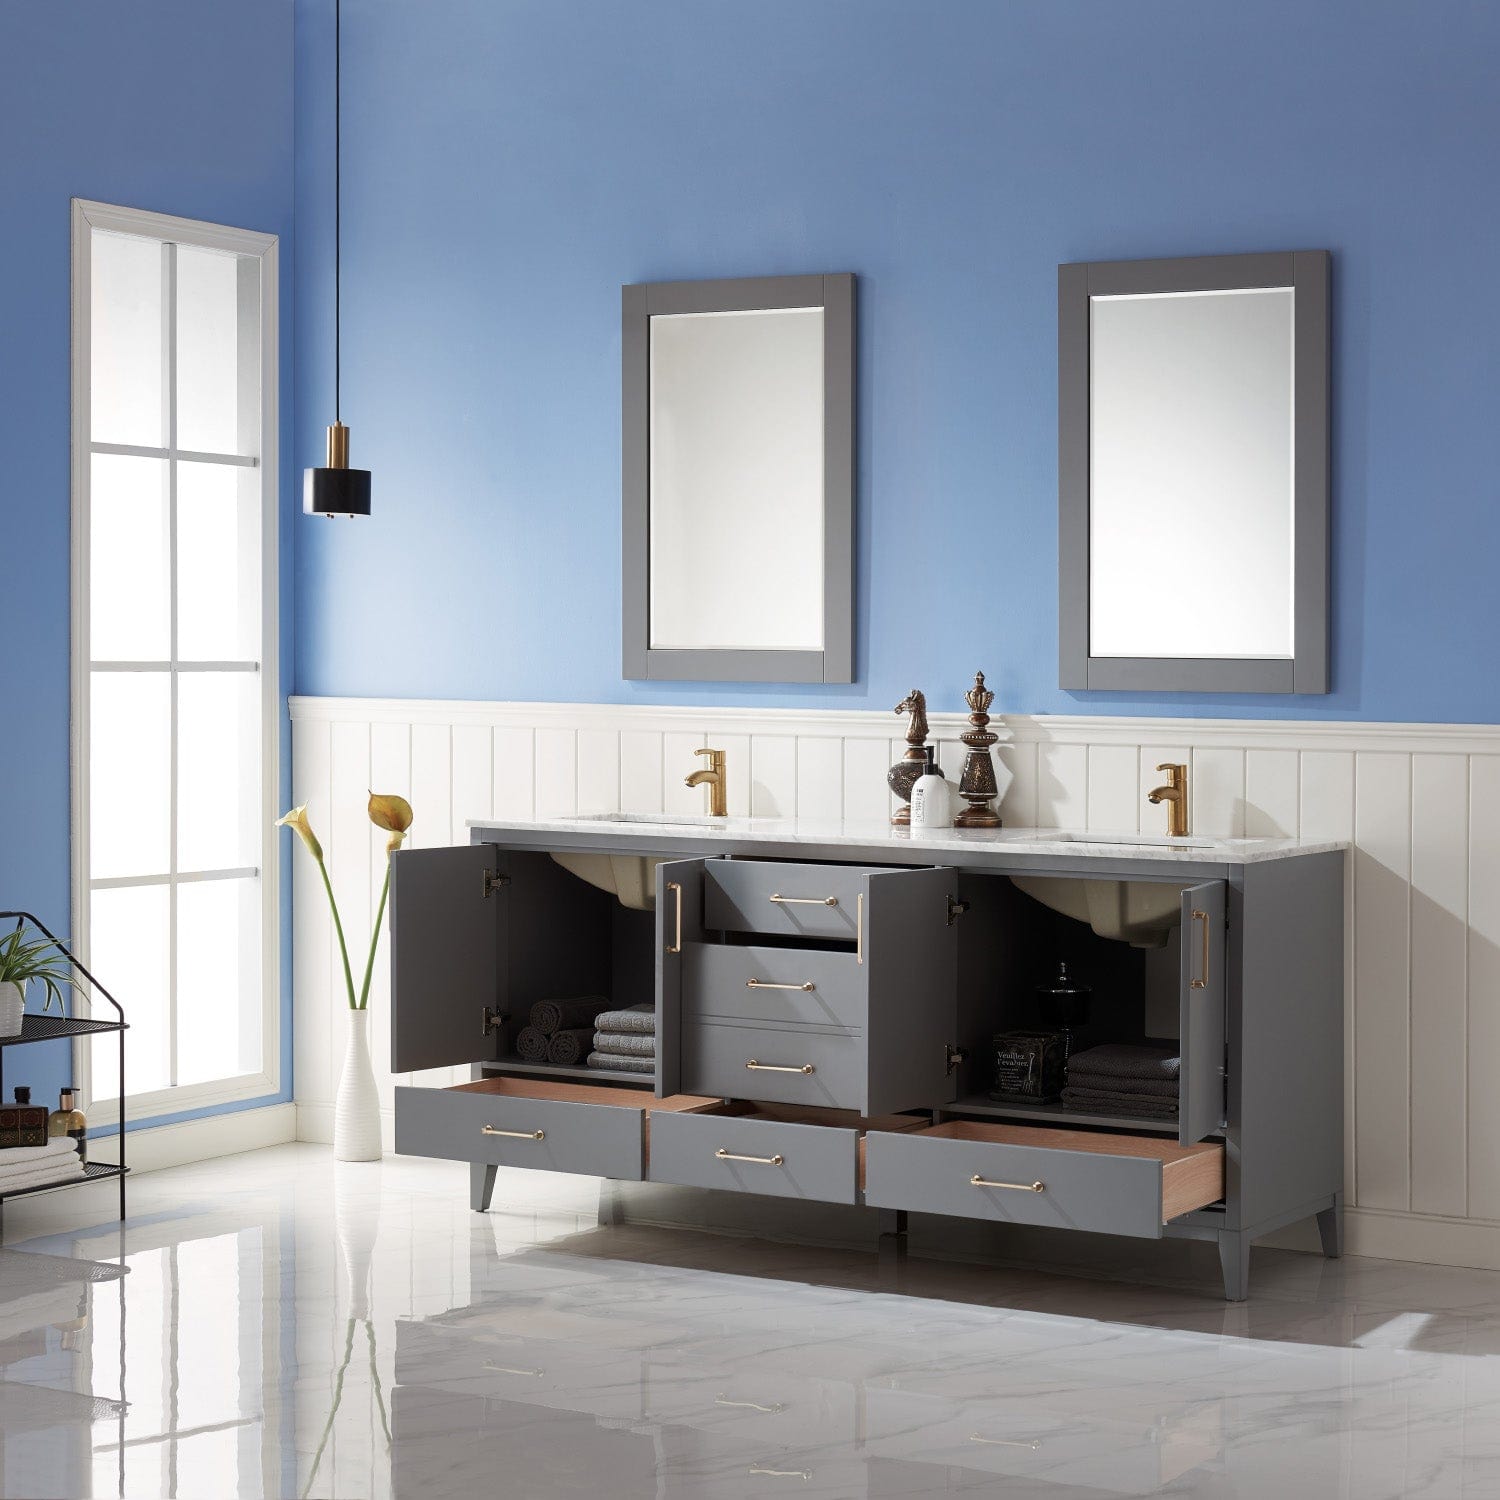 Altair Sutton 72" Double Bathroom Vanity Set in Gray and Carrara White Marble Countertop with Mirror 541072-GR-CA - Molaix631112971997Vanity541072-GR-CA